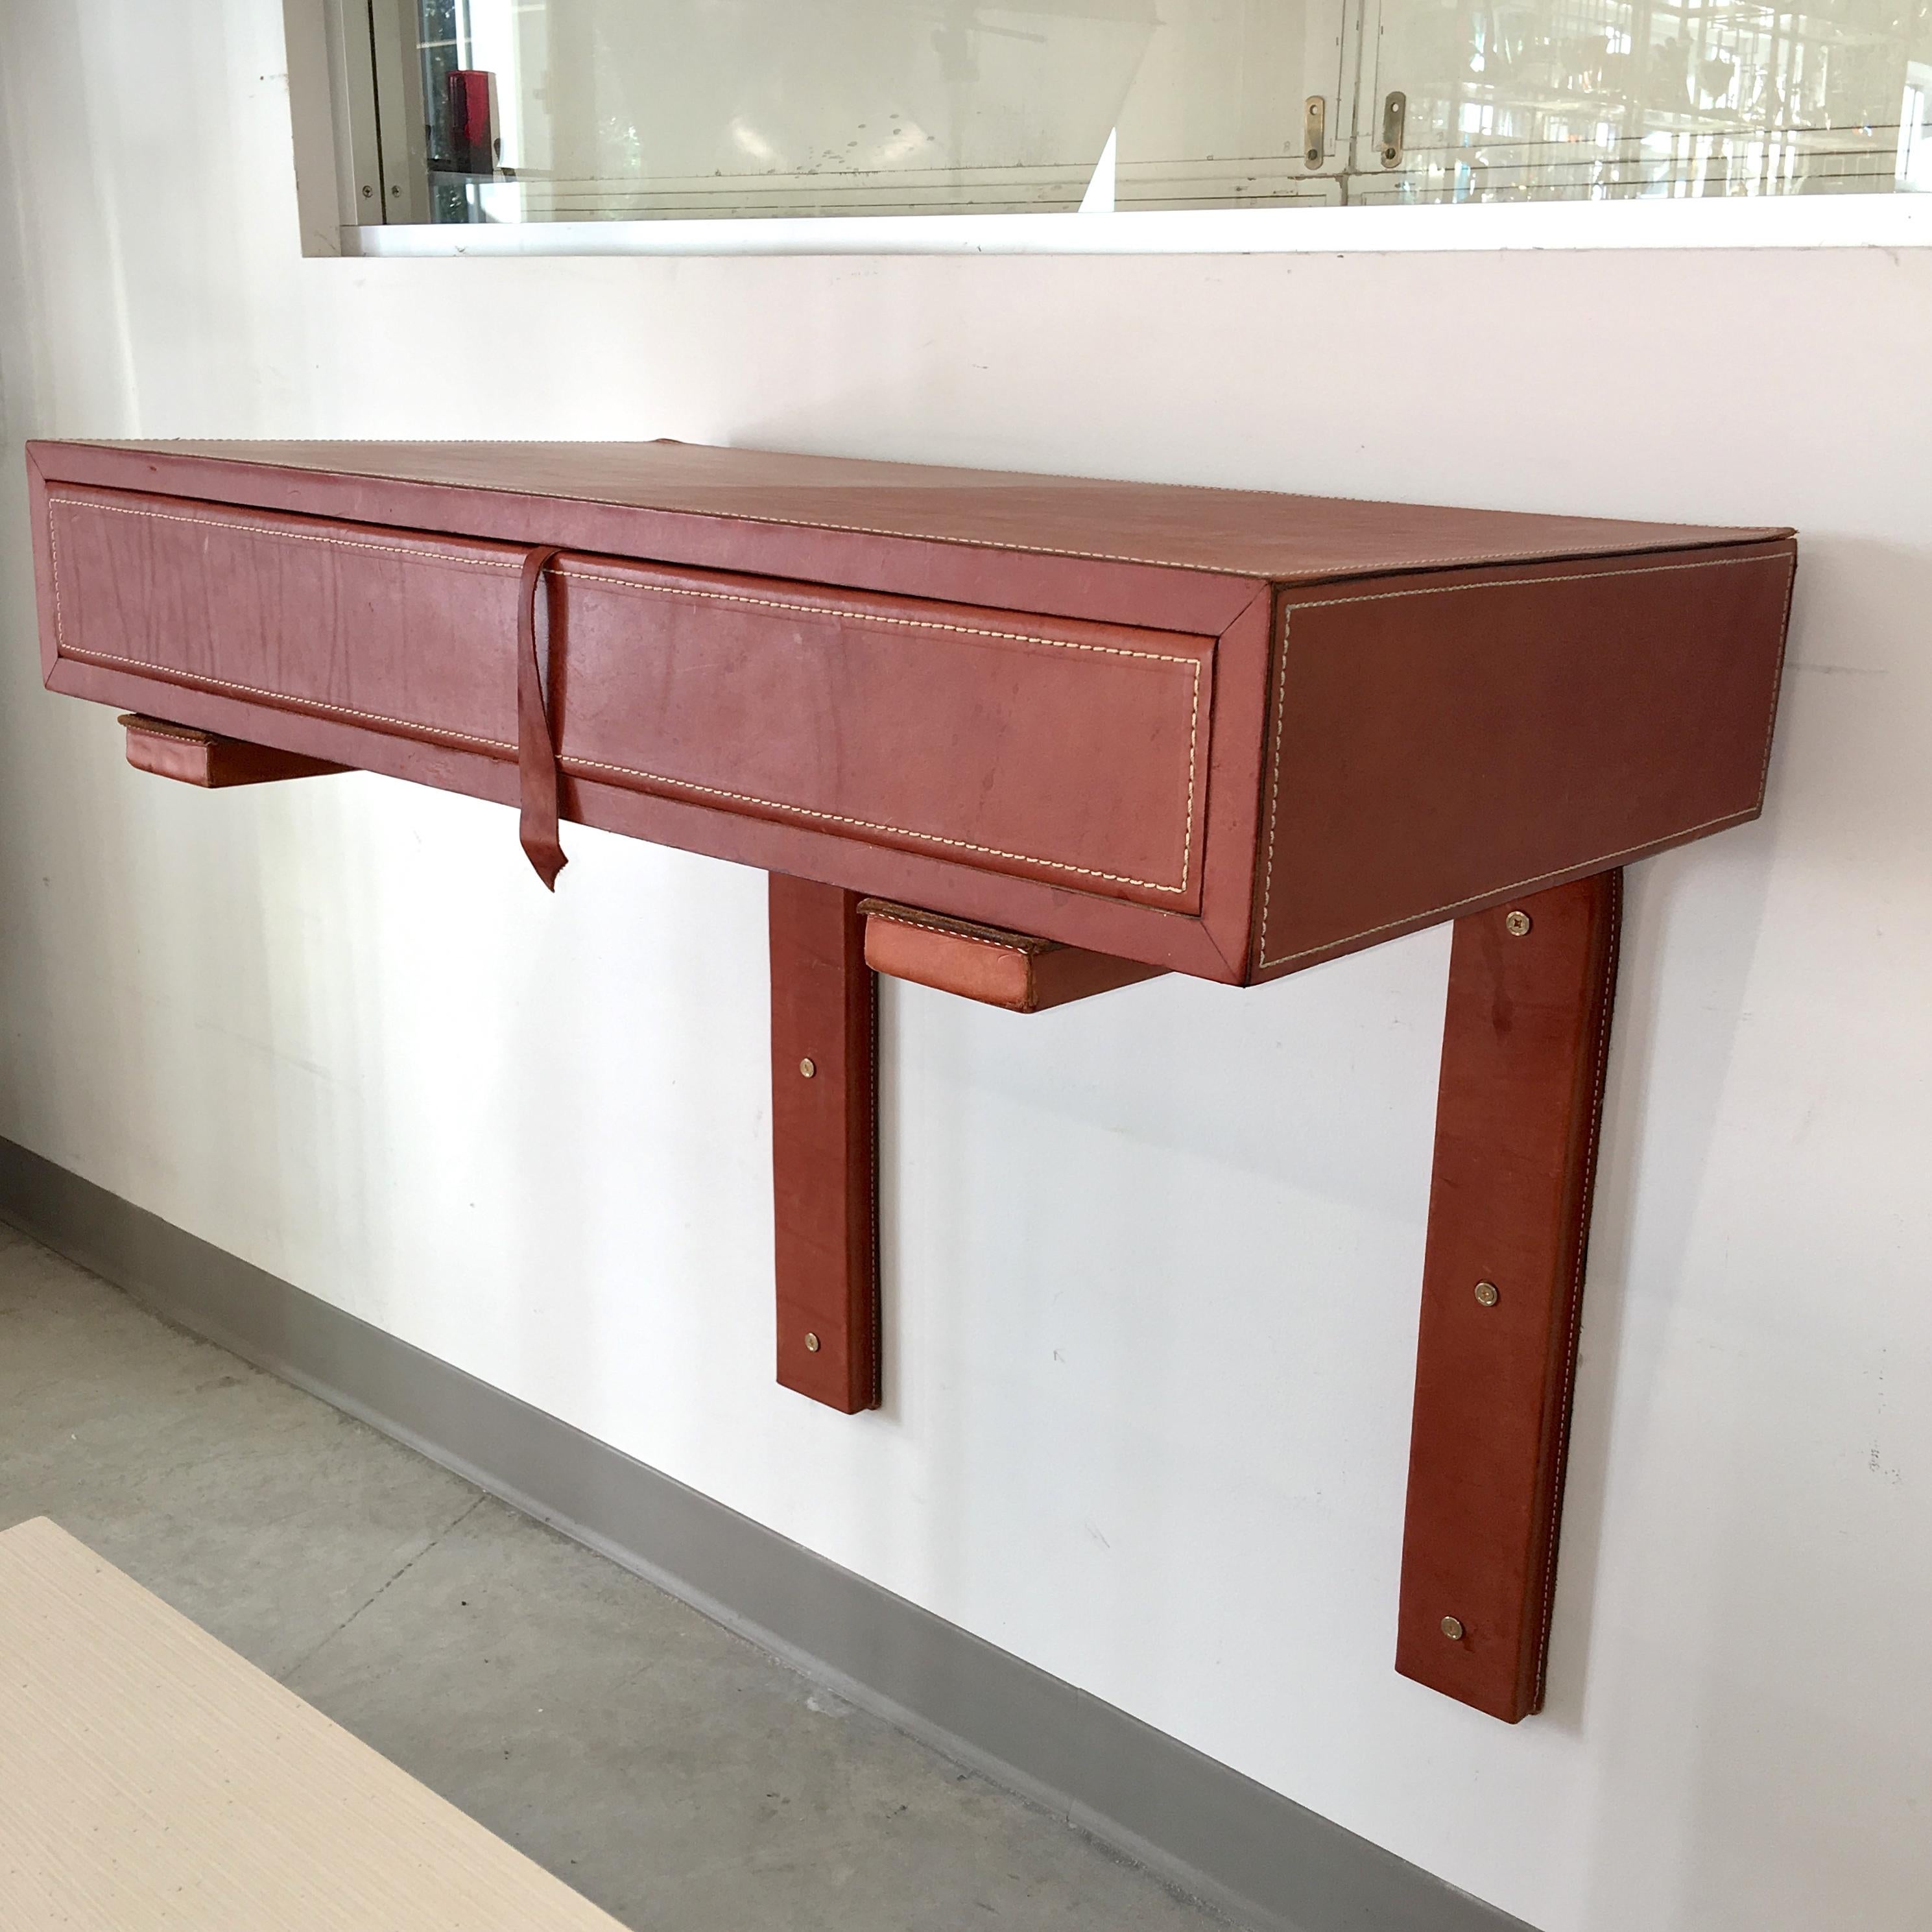 Adnet Style Saddle Stitched Leather Cantilevered Wall Console In Good Condition For Sale In Hanover, MA